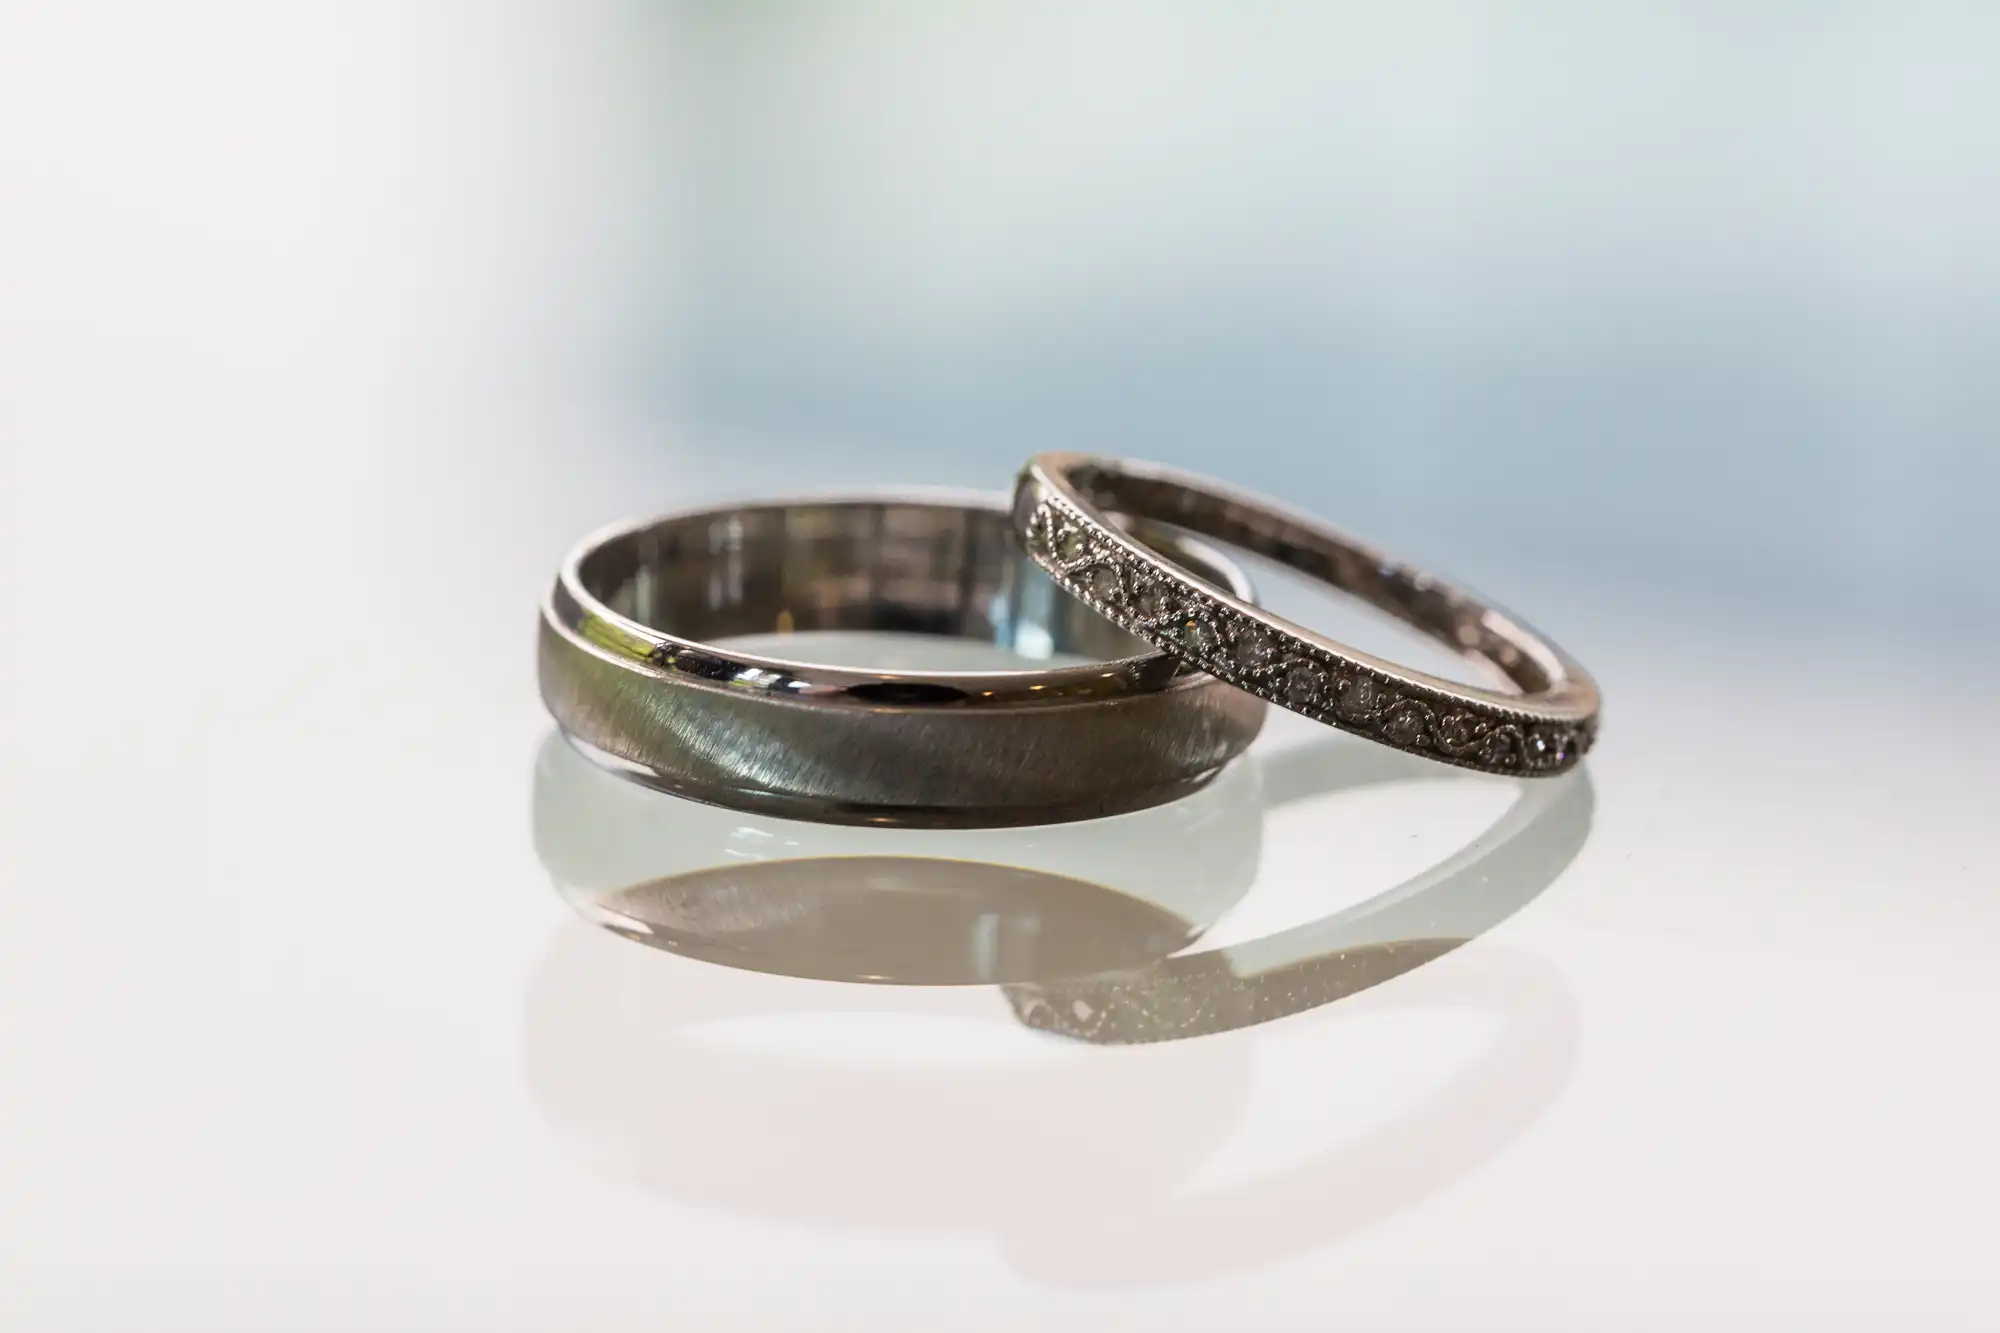 Two wedding rings, one encrusted with tiny diamonds and the other a smooth, dark metal, on a reflective surface with a blurred white background.